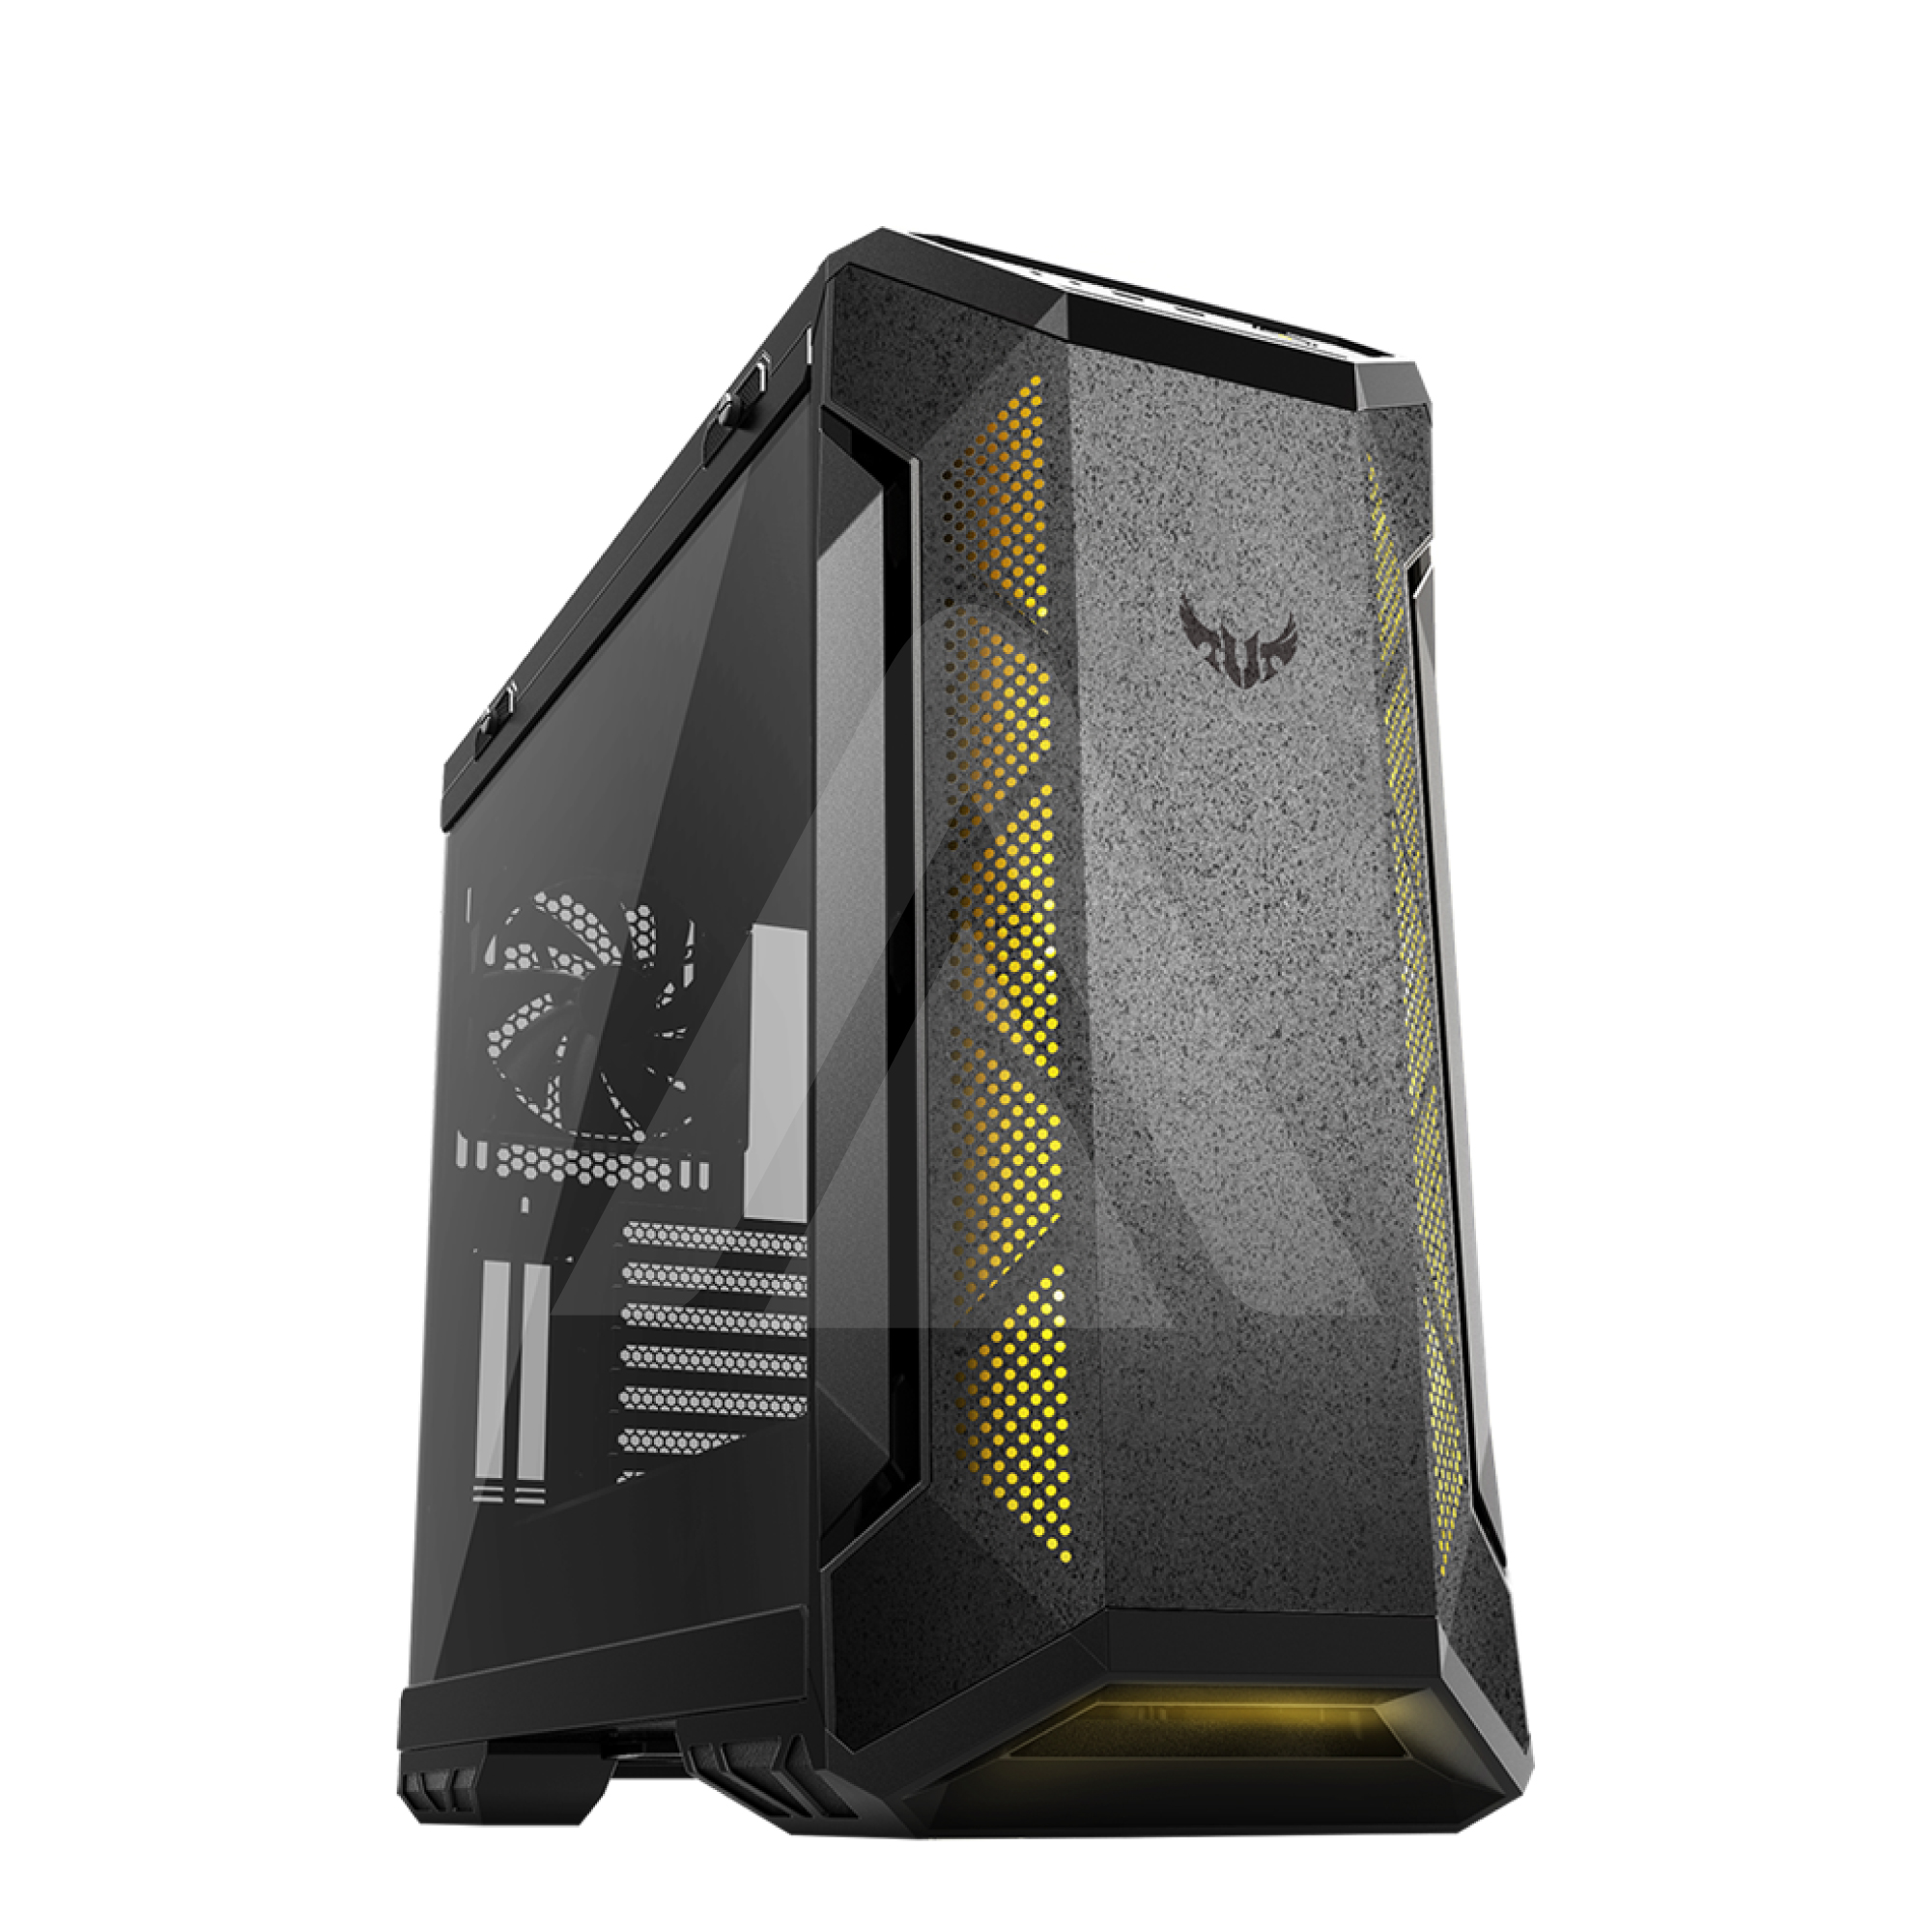 CASE ASUS TUF GAMING GT501 EATX / USB 3.0 GT501/GRY